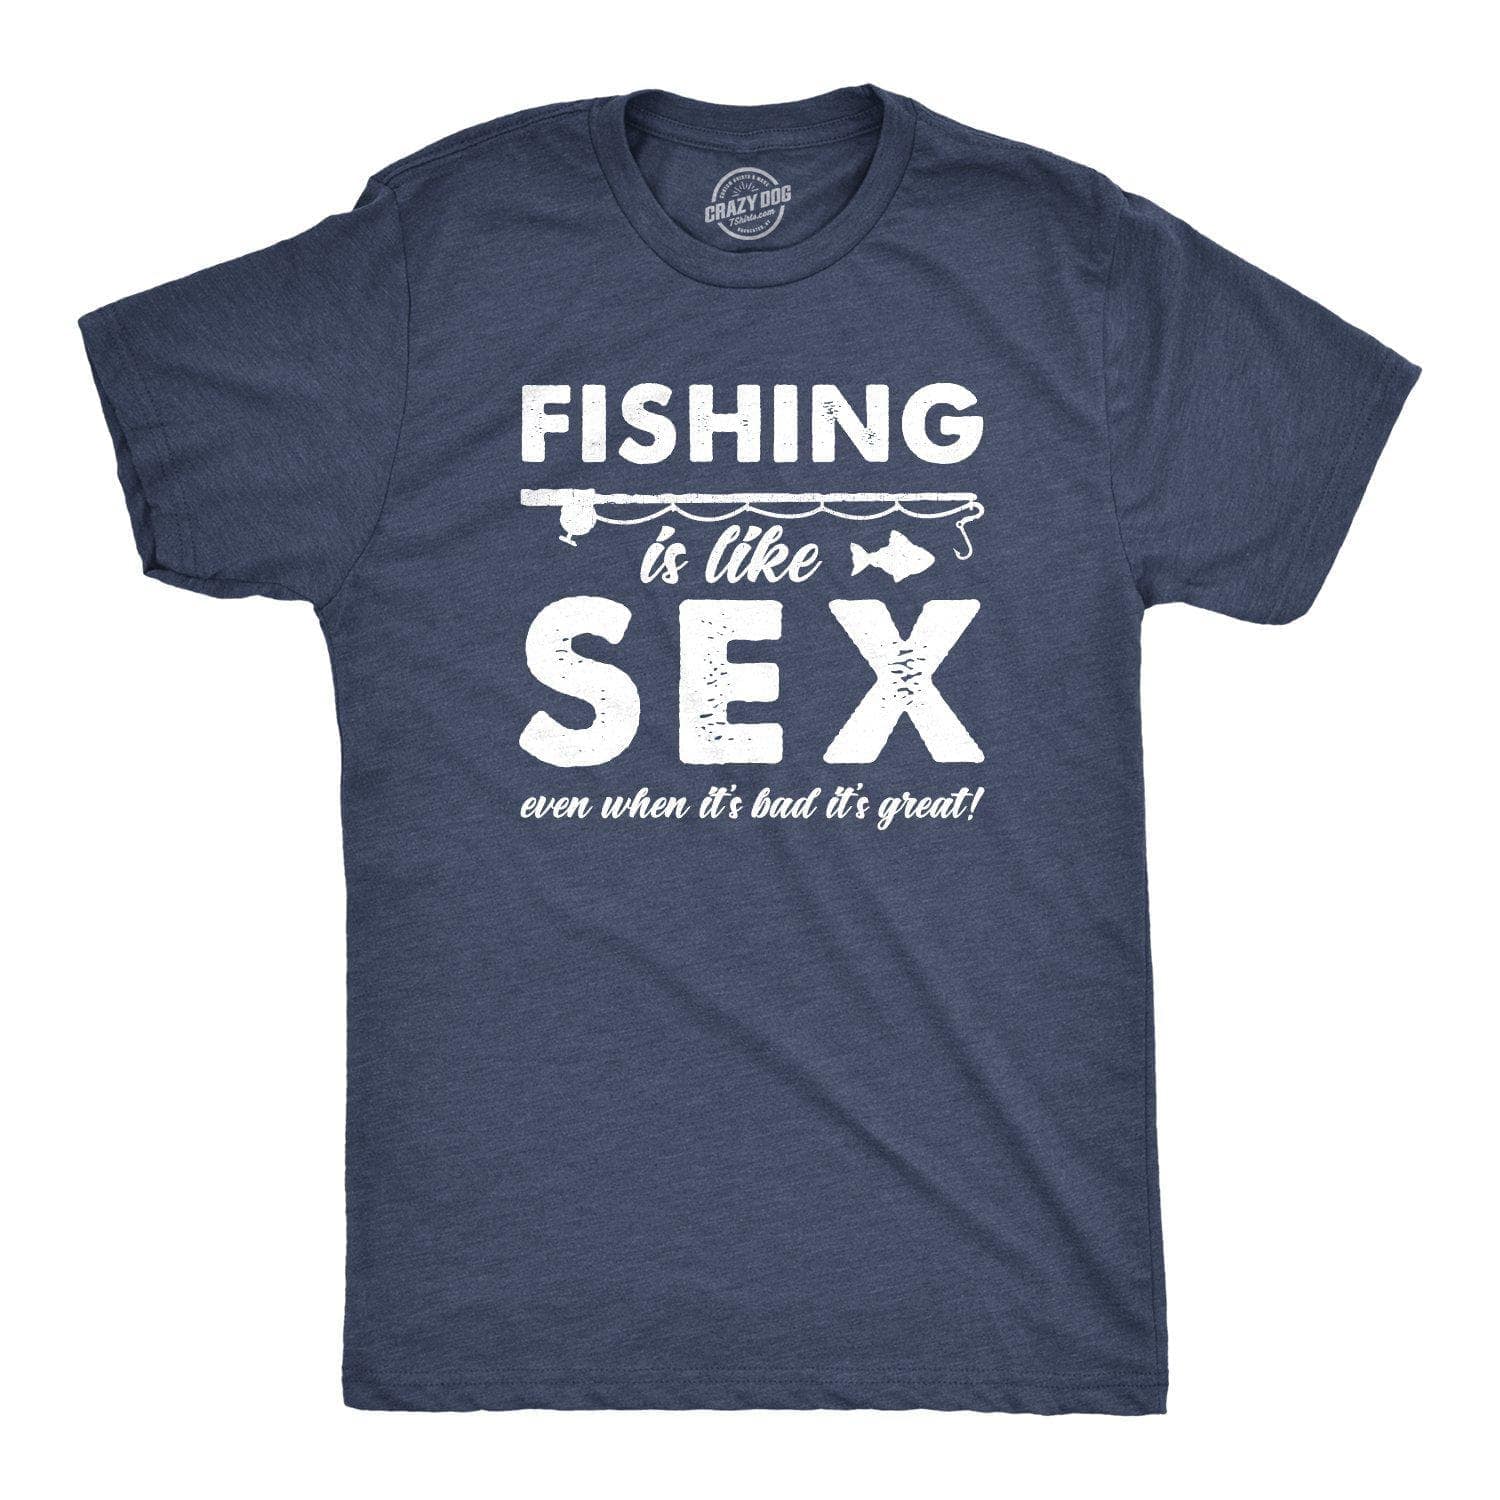 Mens I Hate Being So Sexy But I'm A Fisherman So I Can't Help It Tshirt Funny Fishing Tee